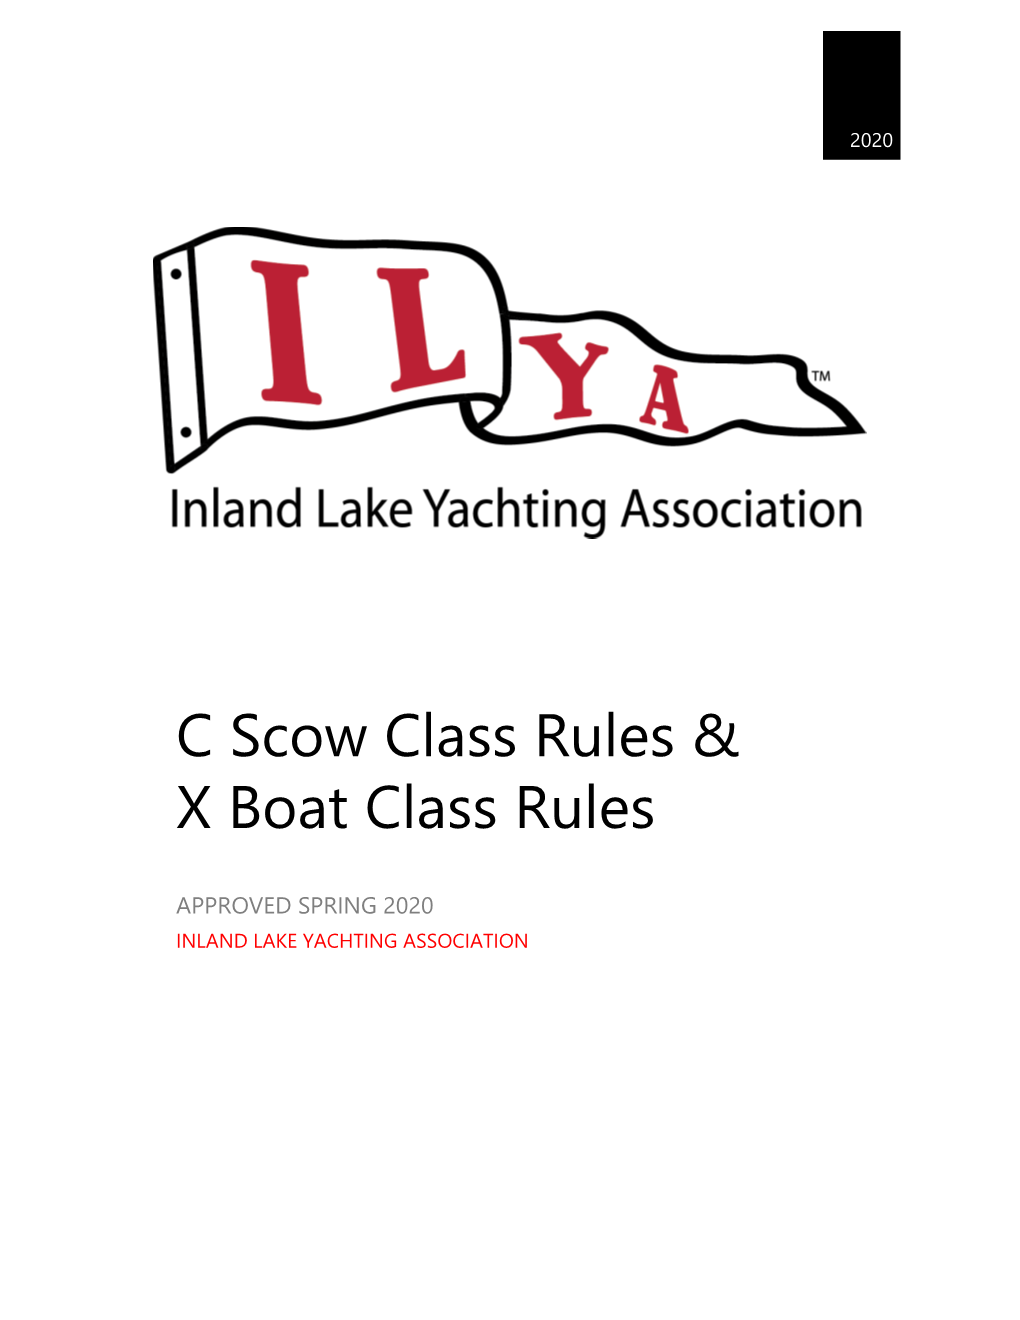 C Scow Class Rules & X Boat Class Rules